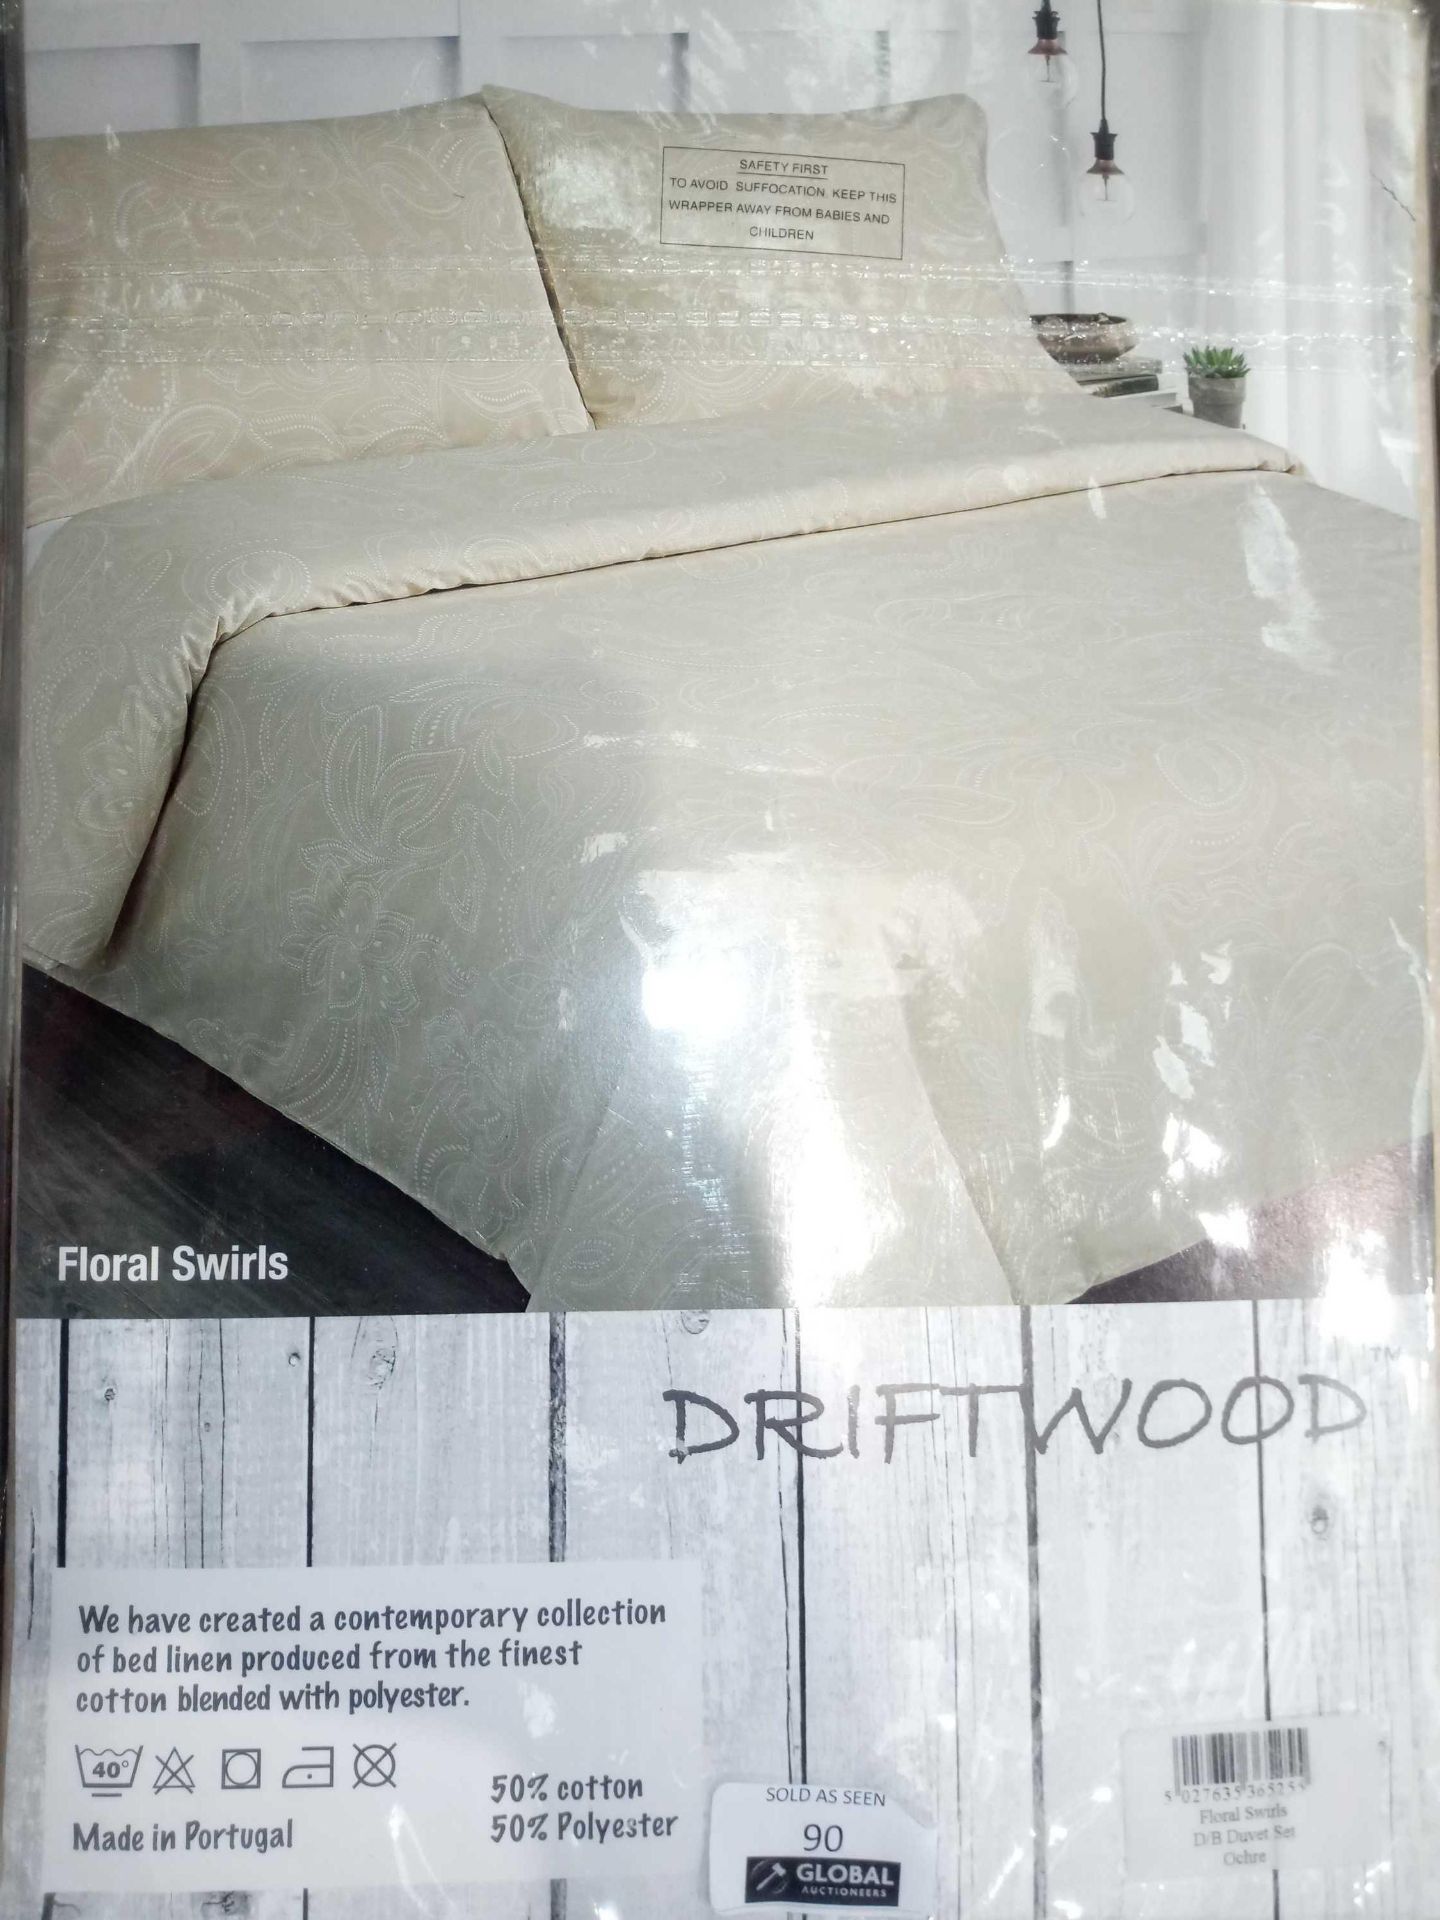 Lot To Contain 2 Driftwood Floral Swirls Double Duvet